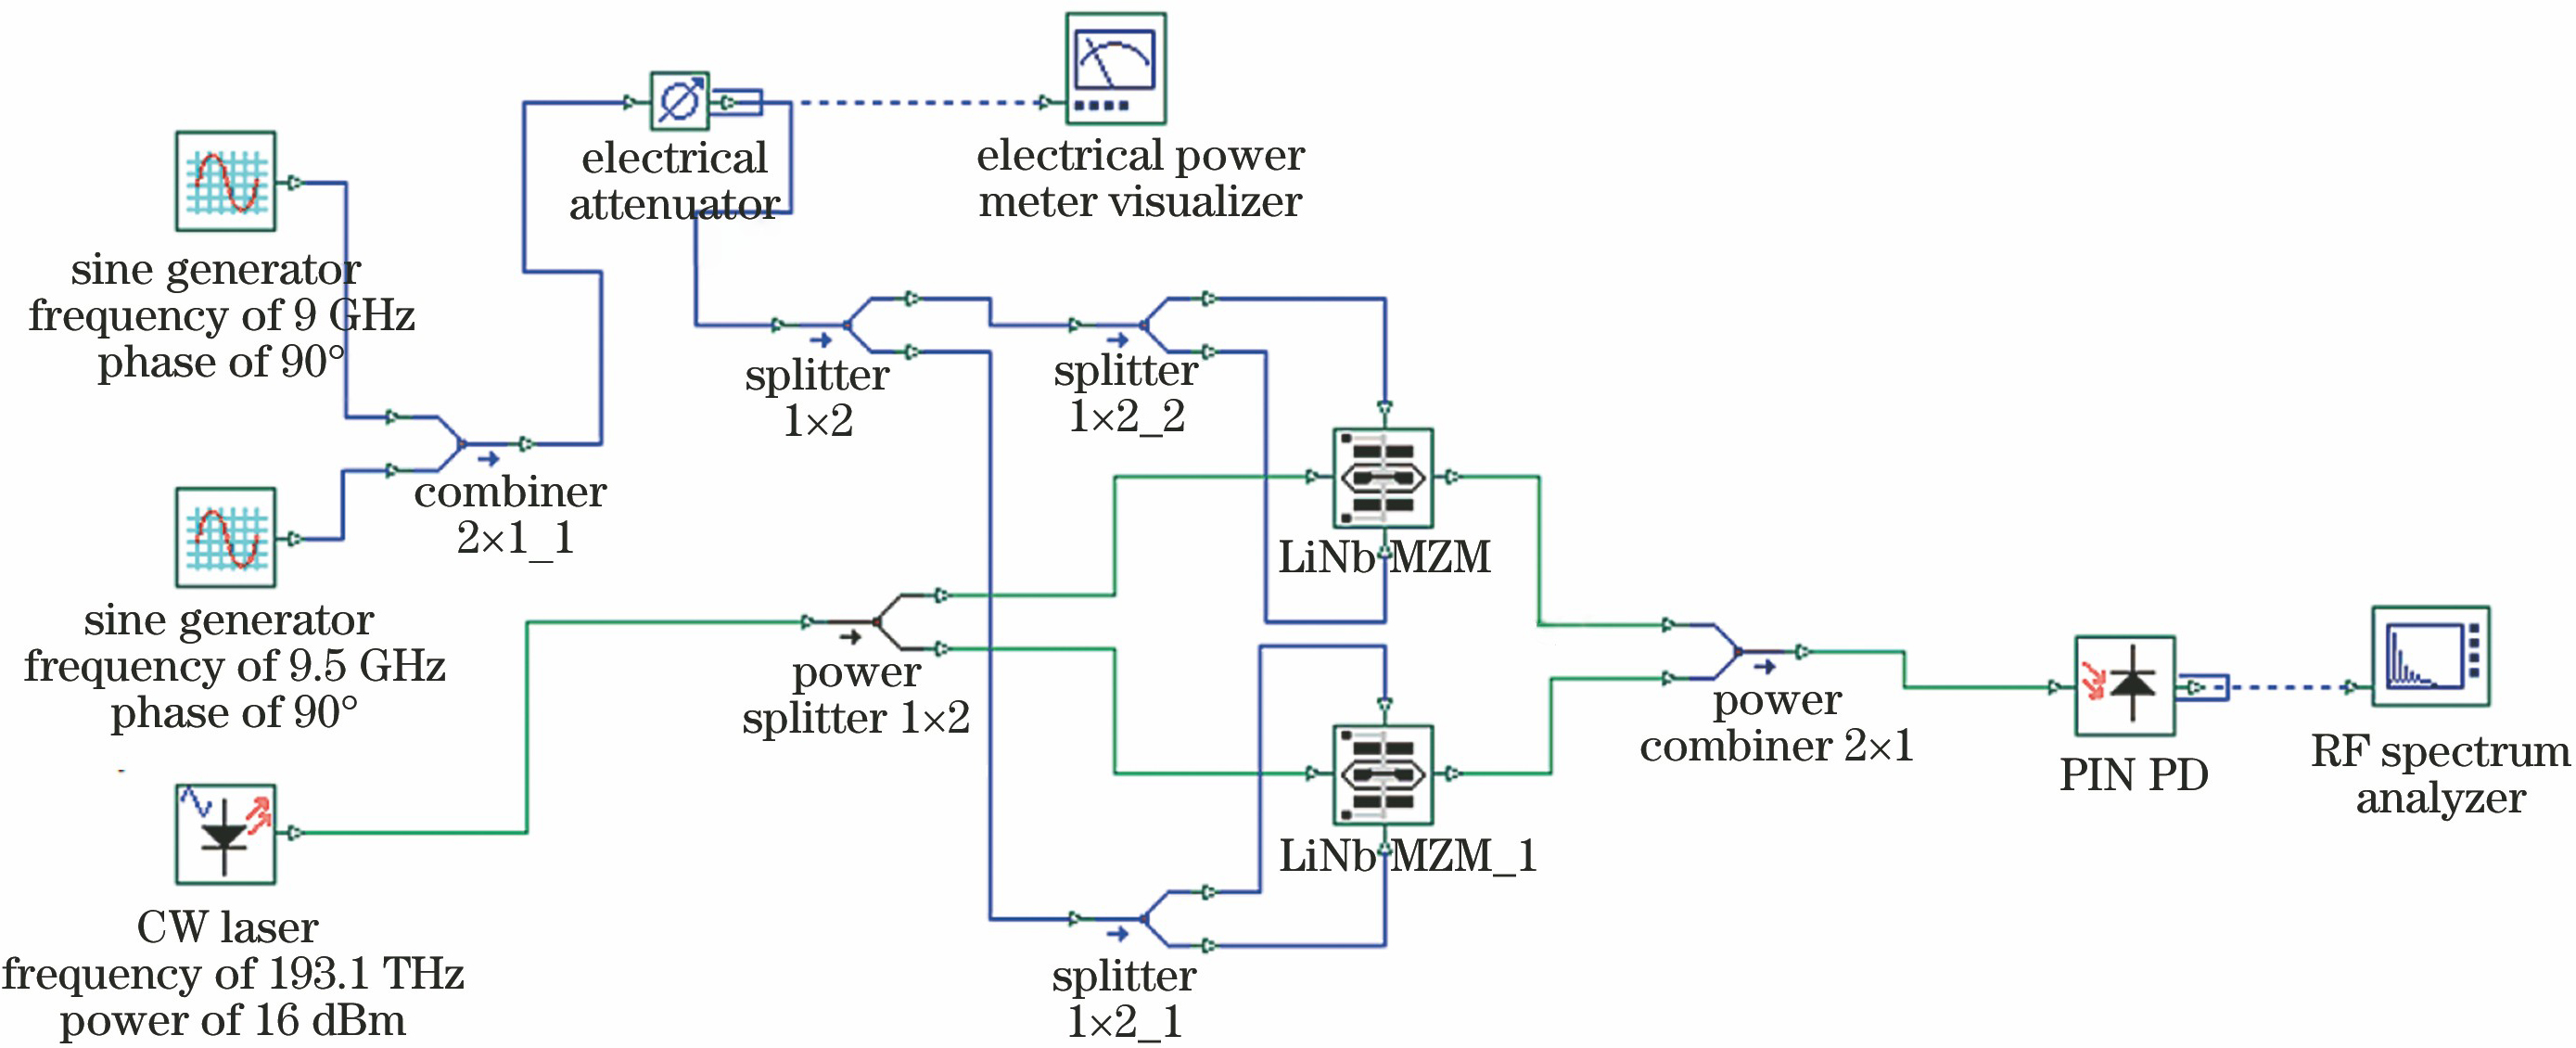 Simulation model of conventional MPL